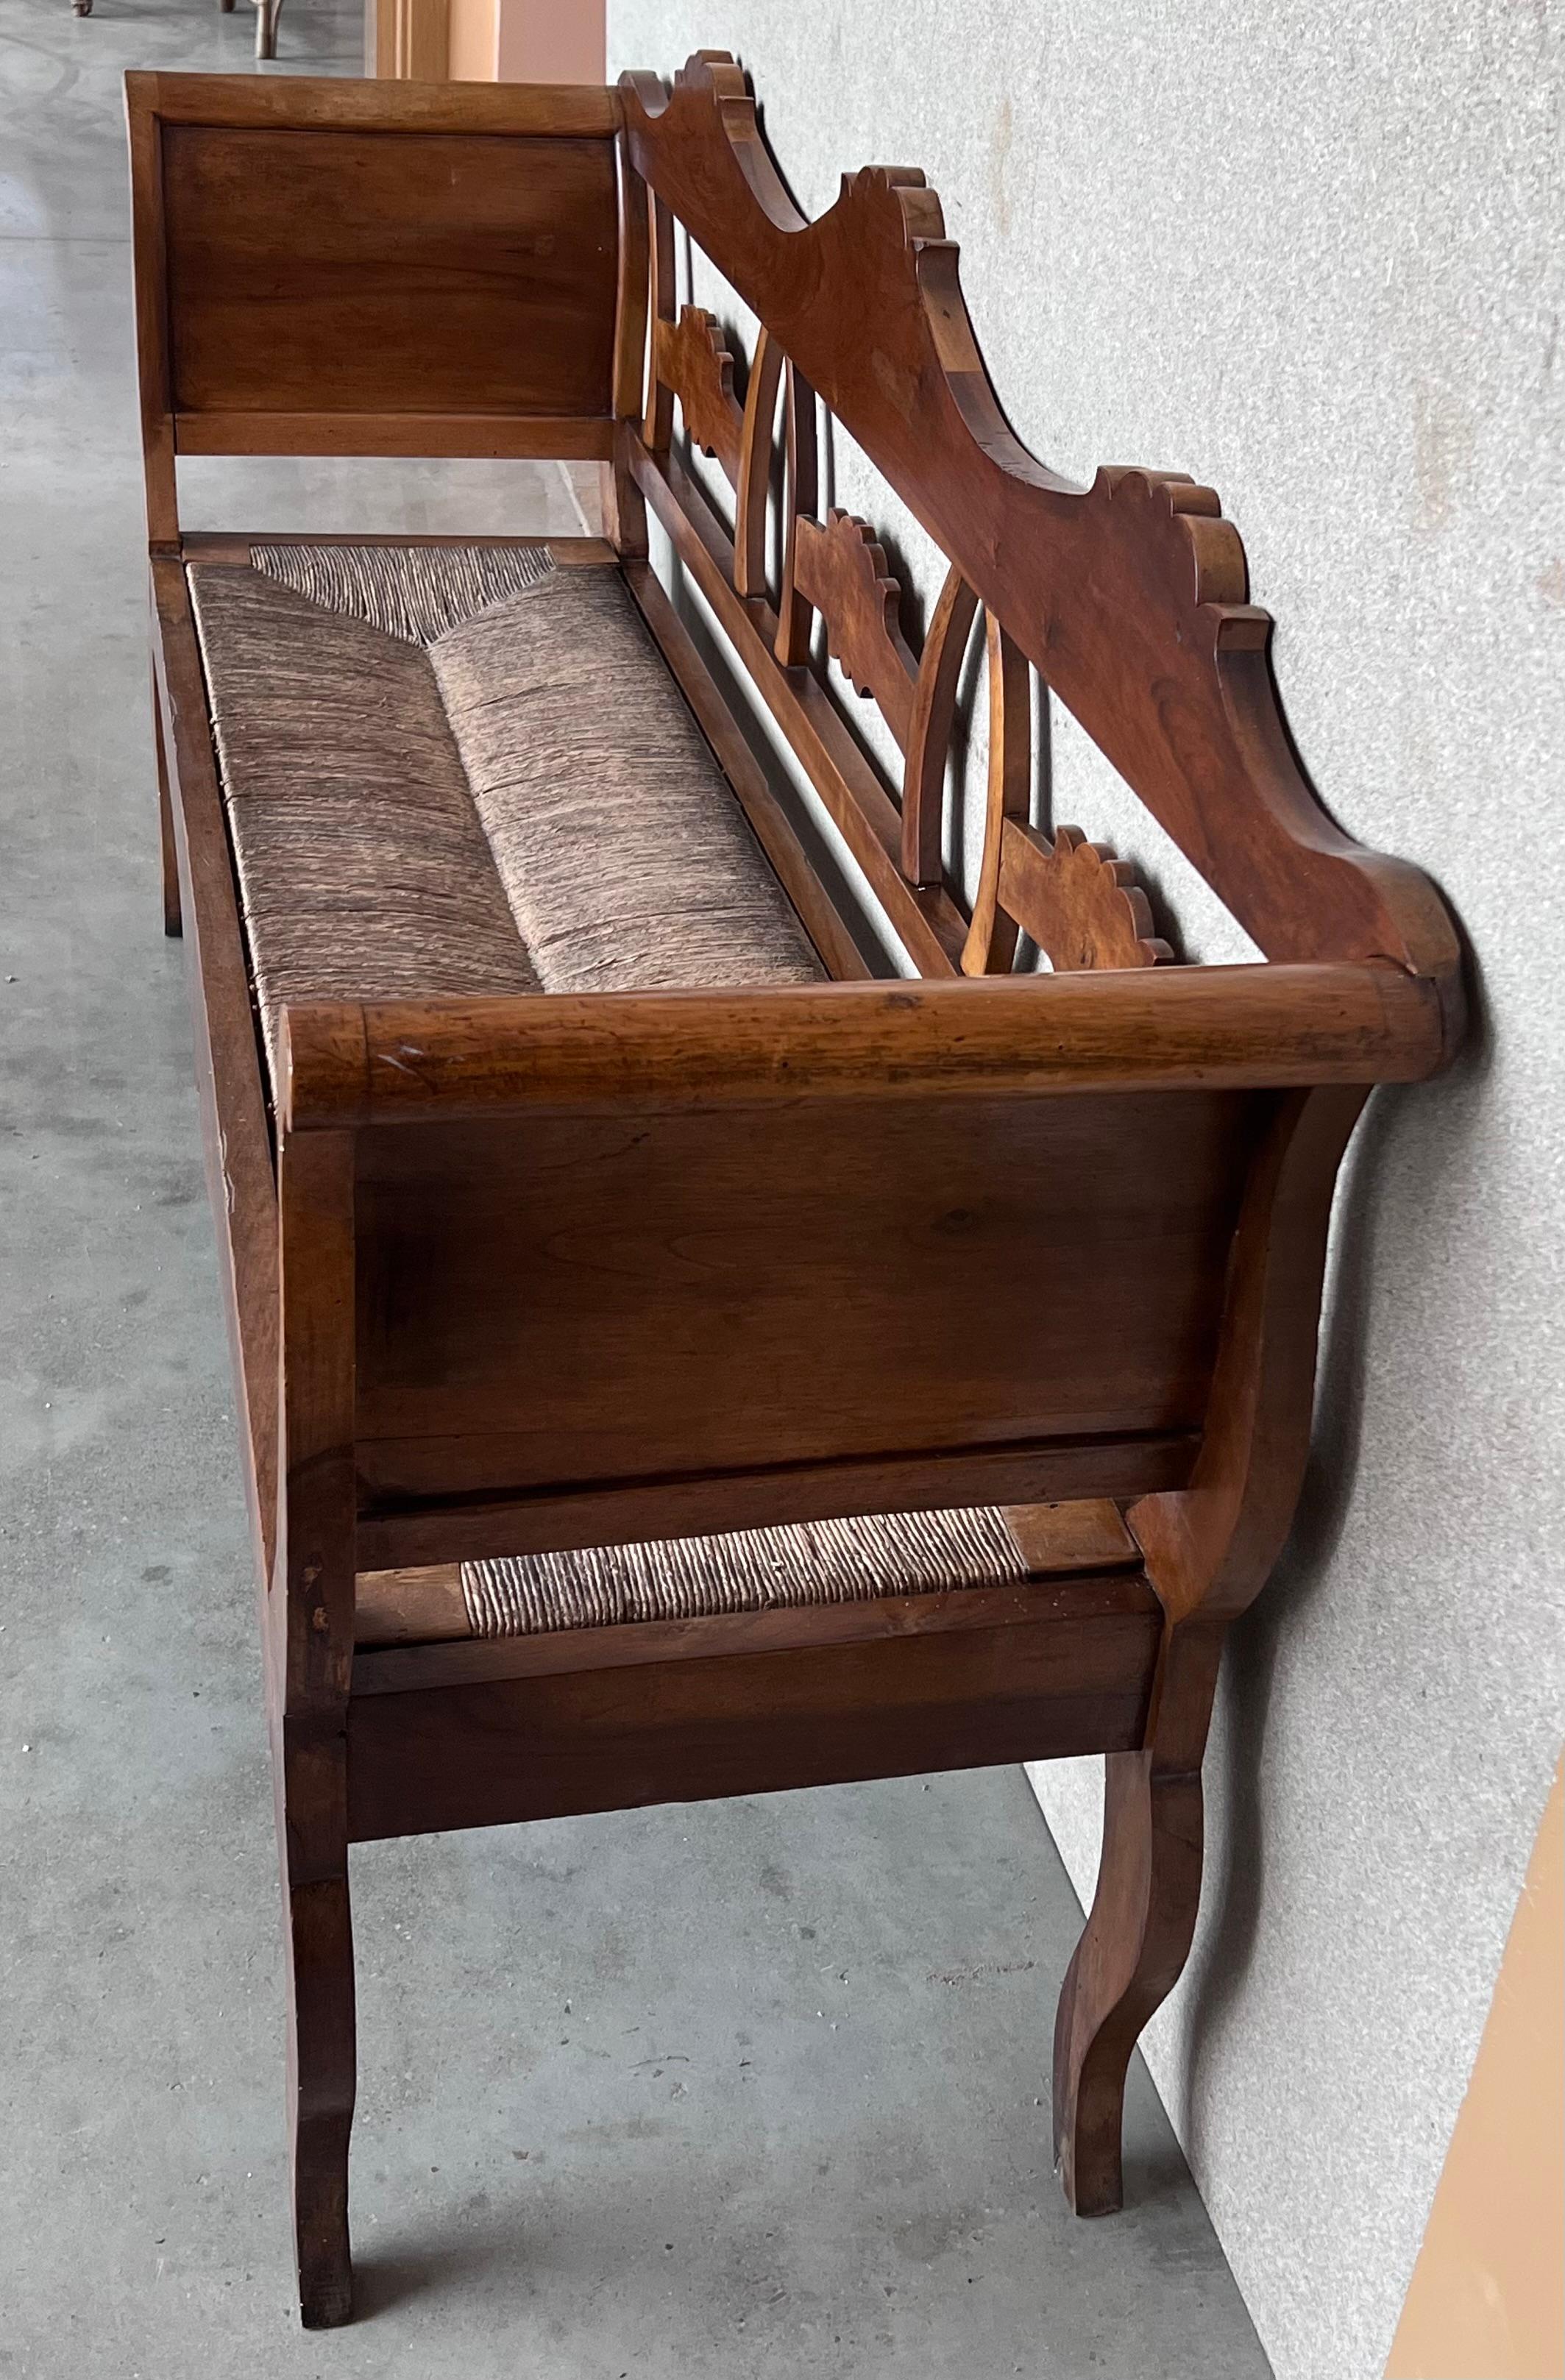 20th Century Catalan Bench in Walnut with Caned Seat In Good Condition For Sale In Miami, FL